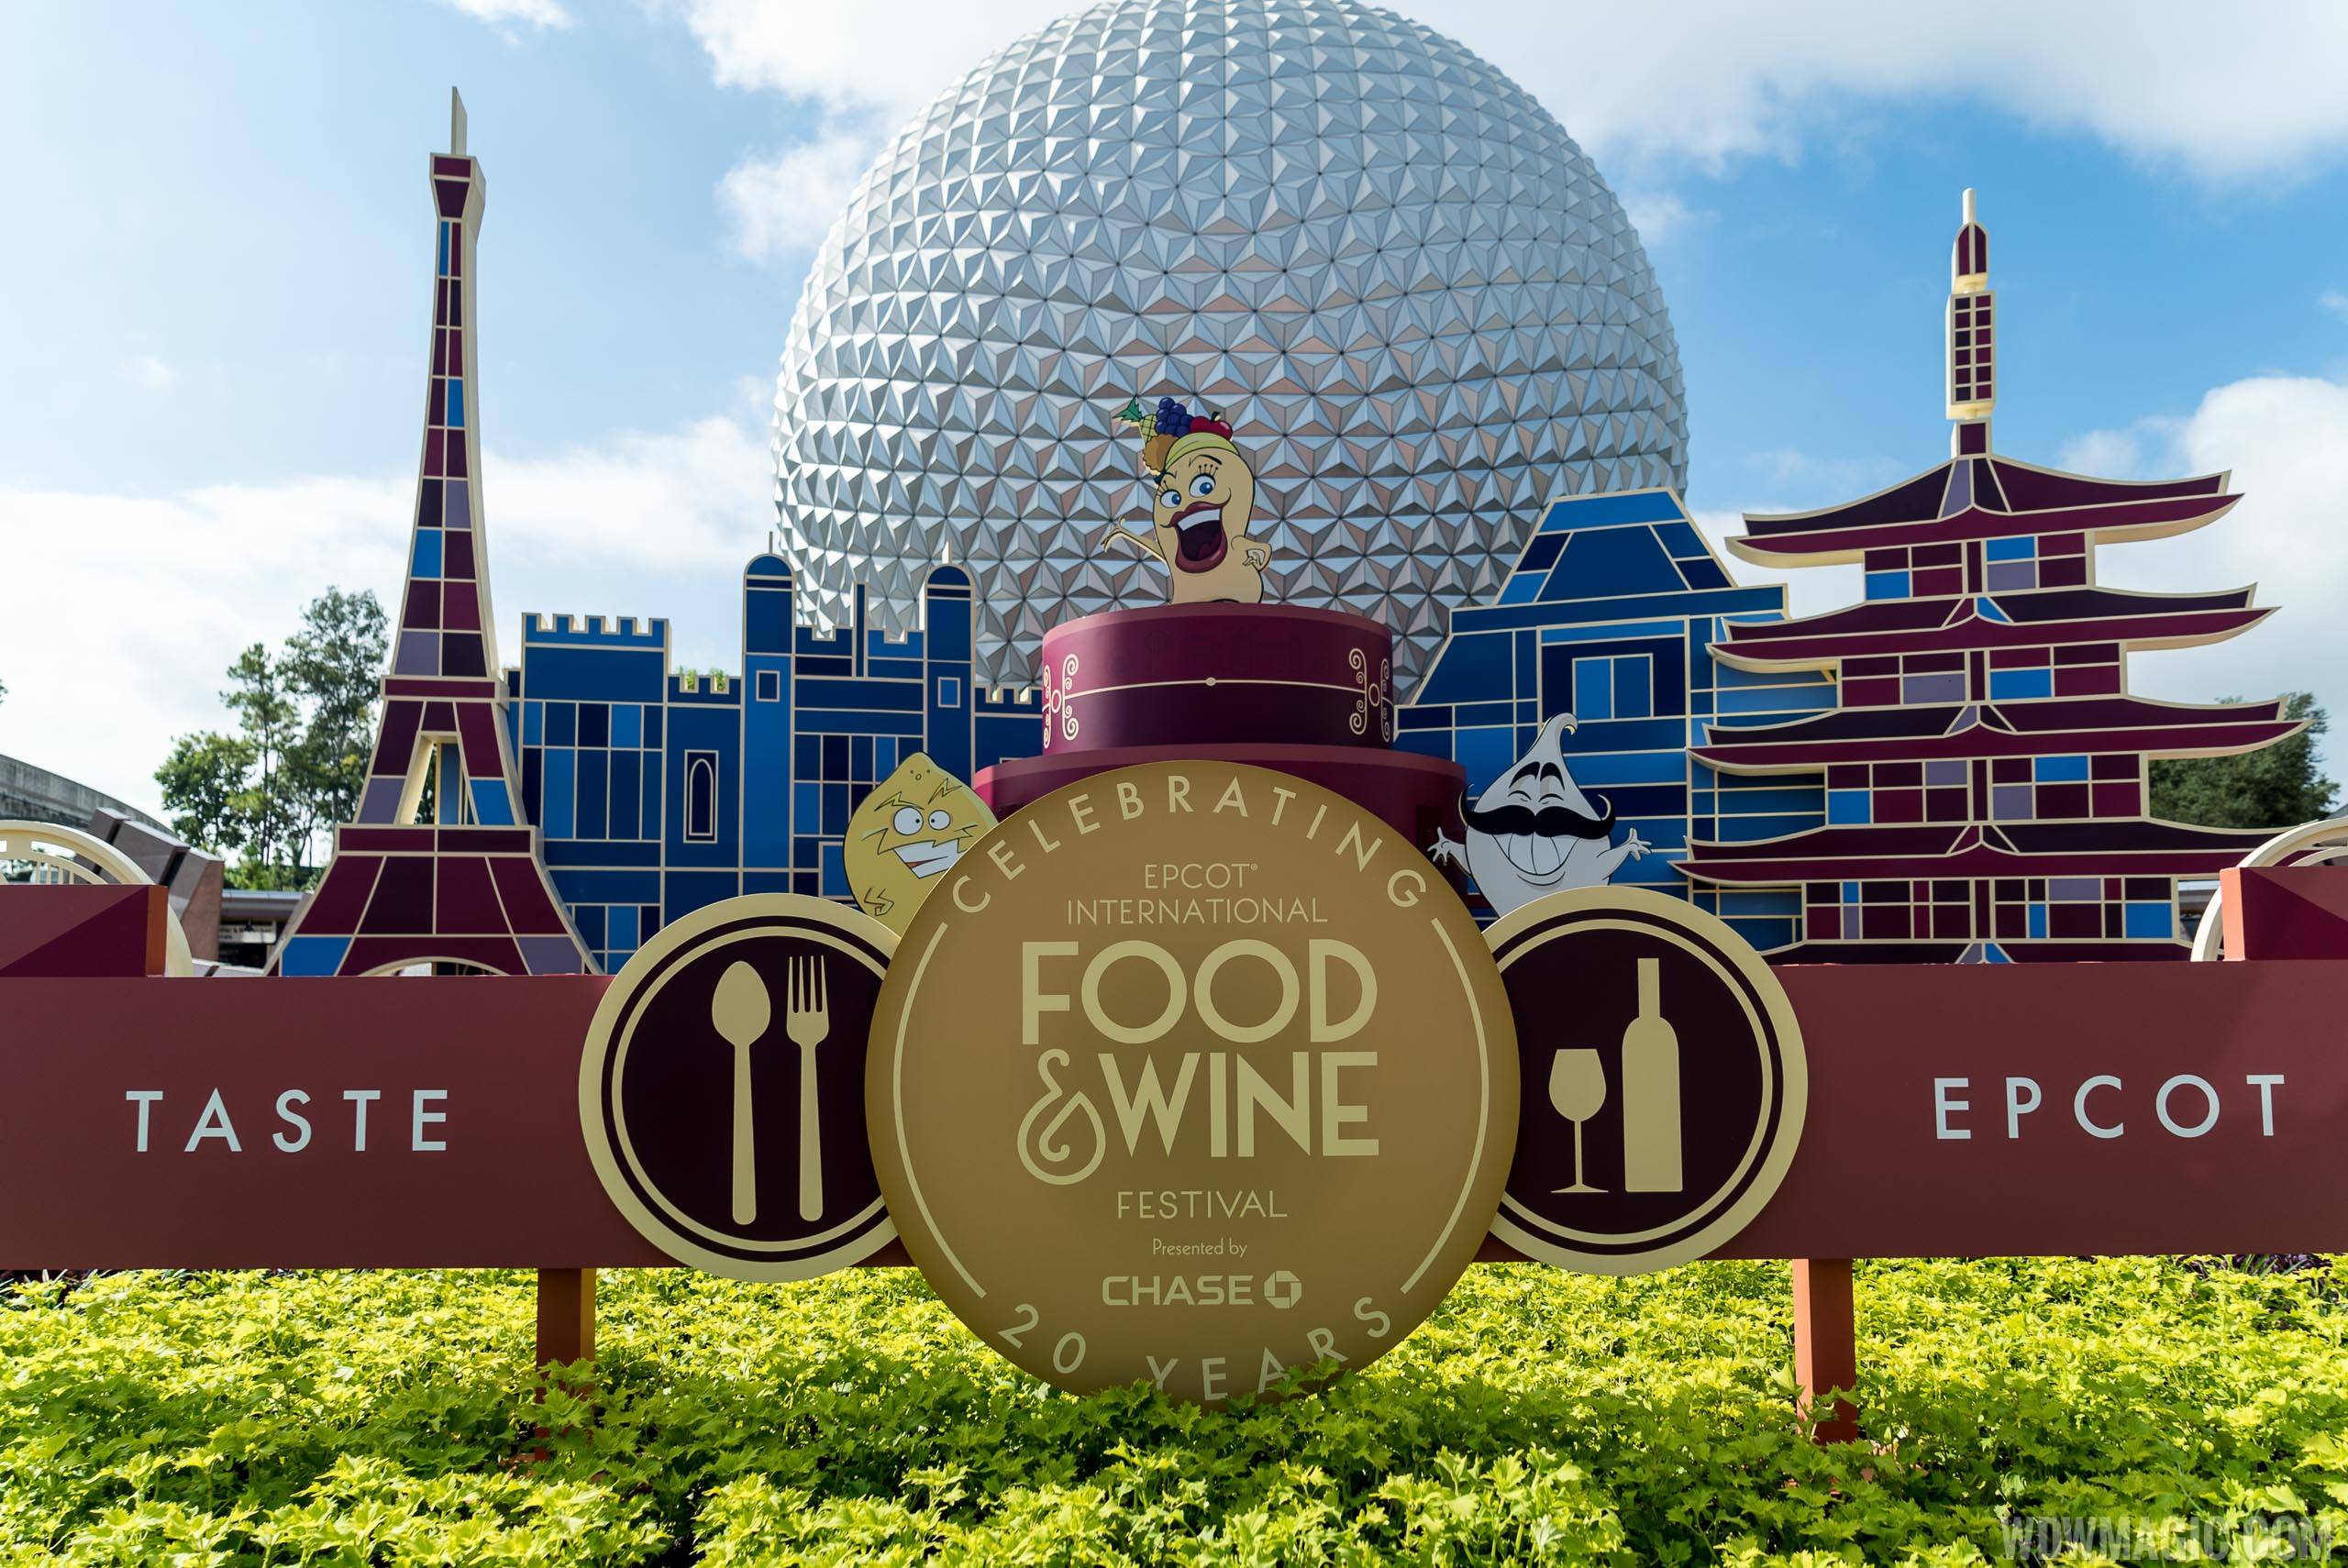 Full menus for the 2016 Epcot International Food and Wine Festival Global  Marketplaces now available